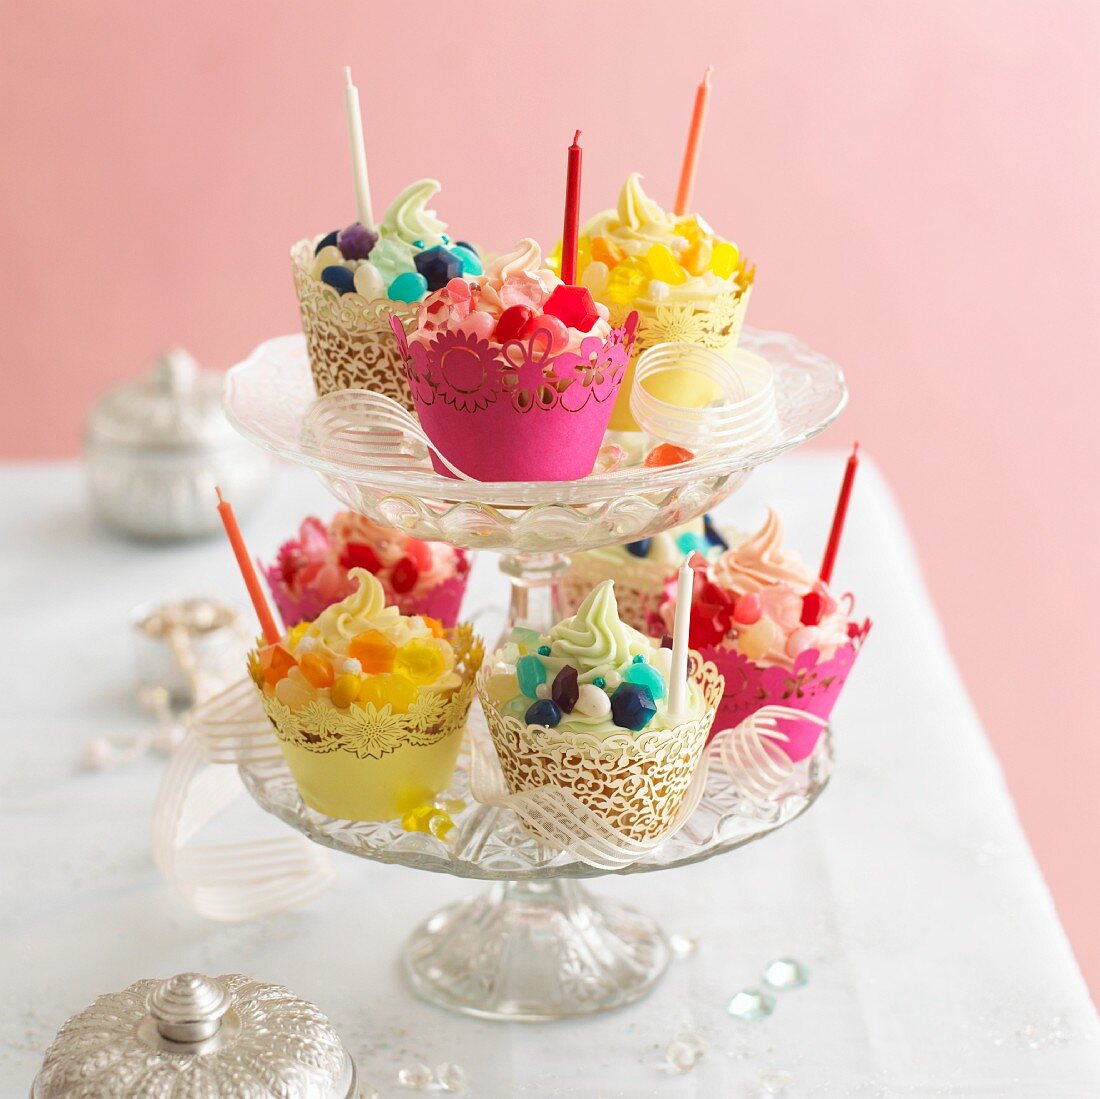 Various party cupcakes on a cake stand